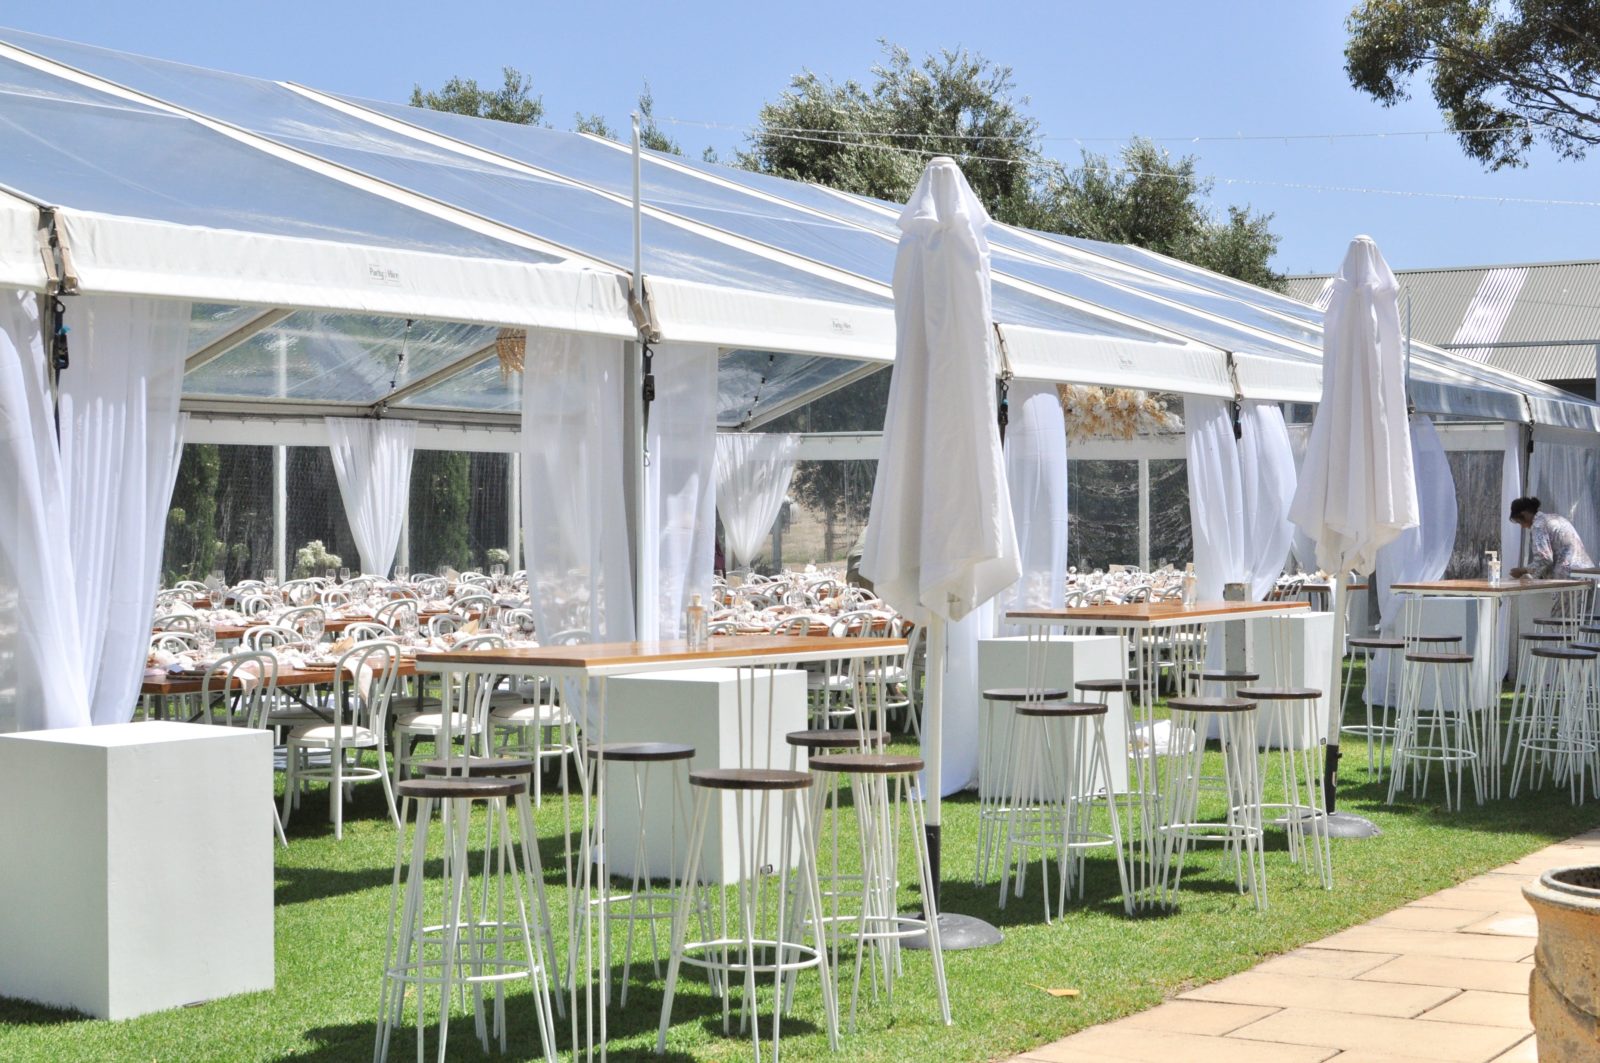 Clear pavilion with festoon lighting, boho shades and drapes